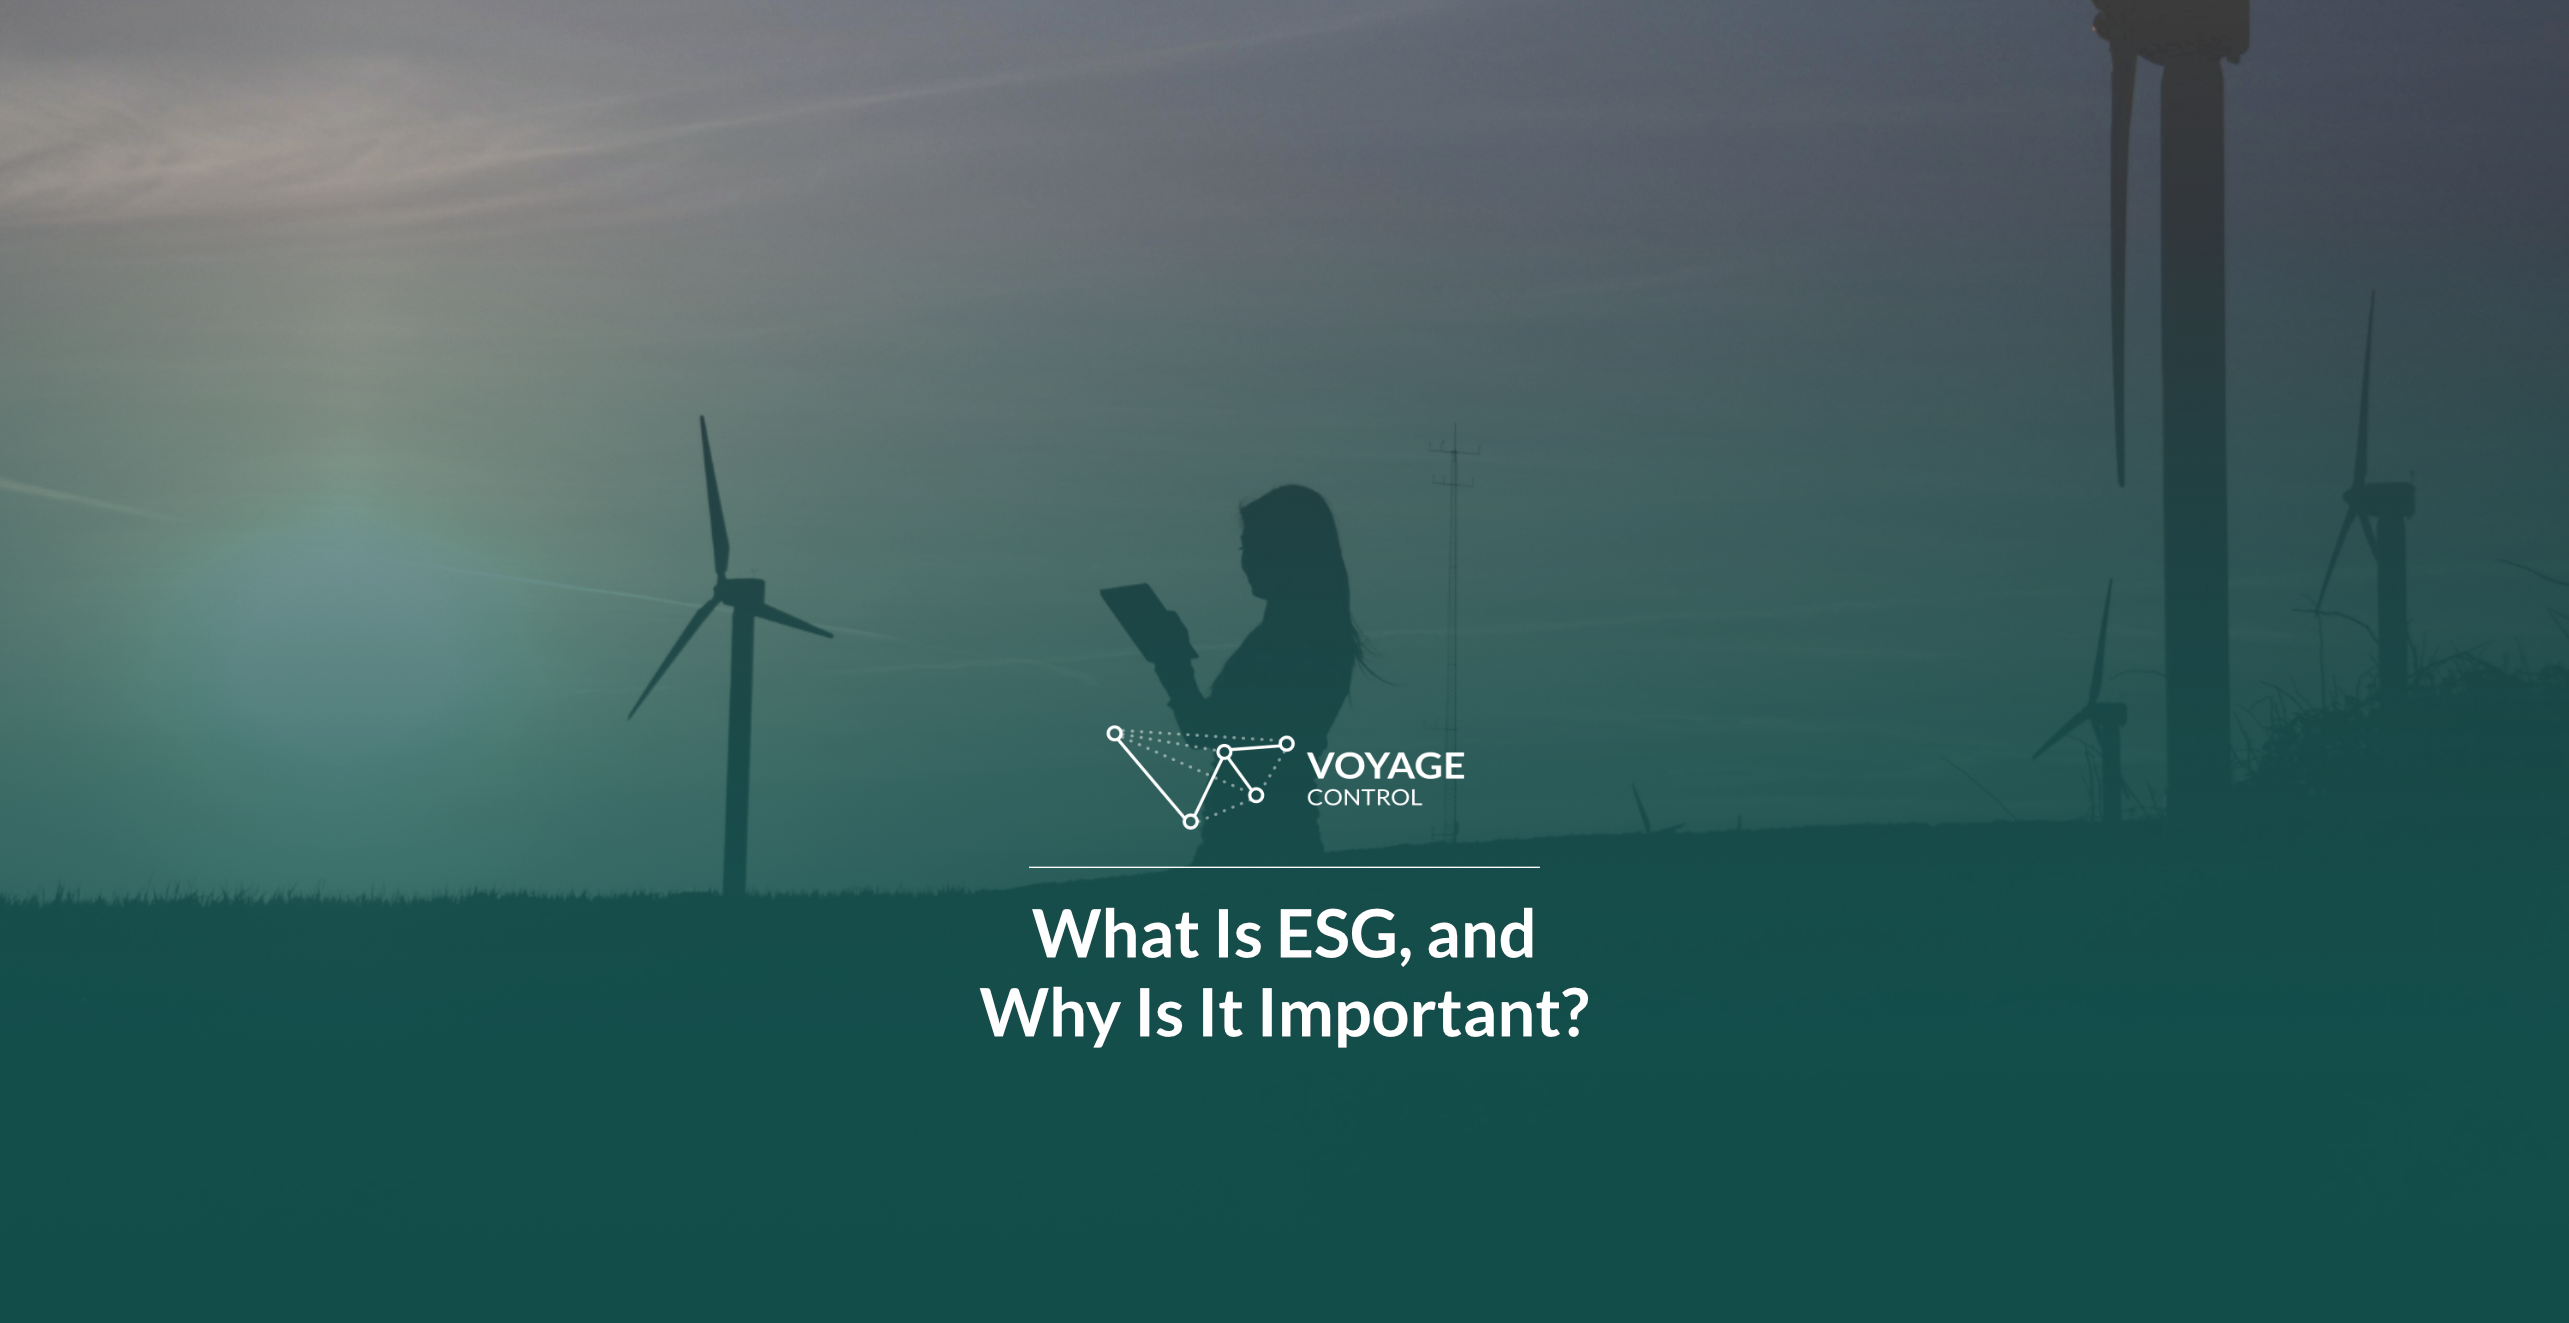 What is ESG (Environmental Social Governance) and why is it important?